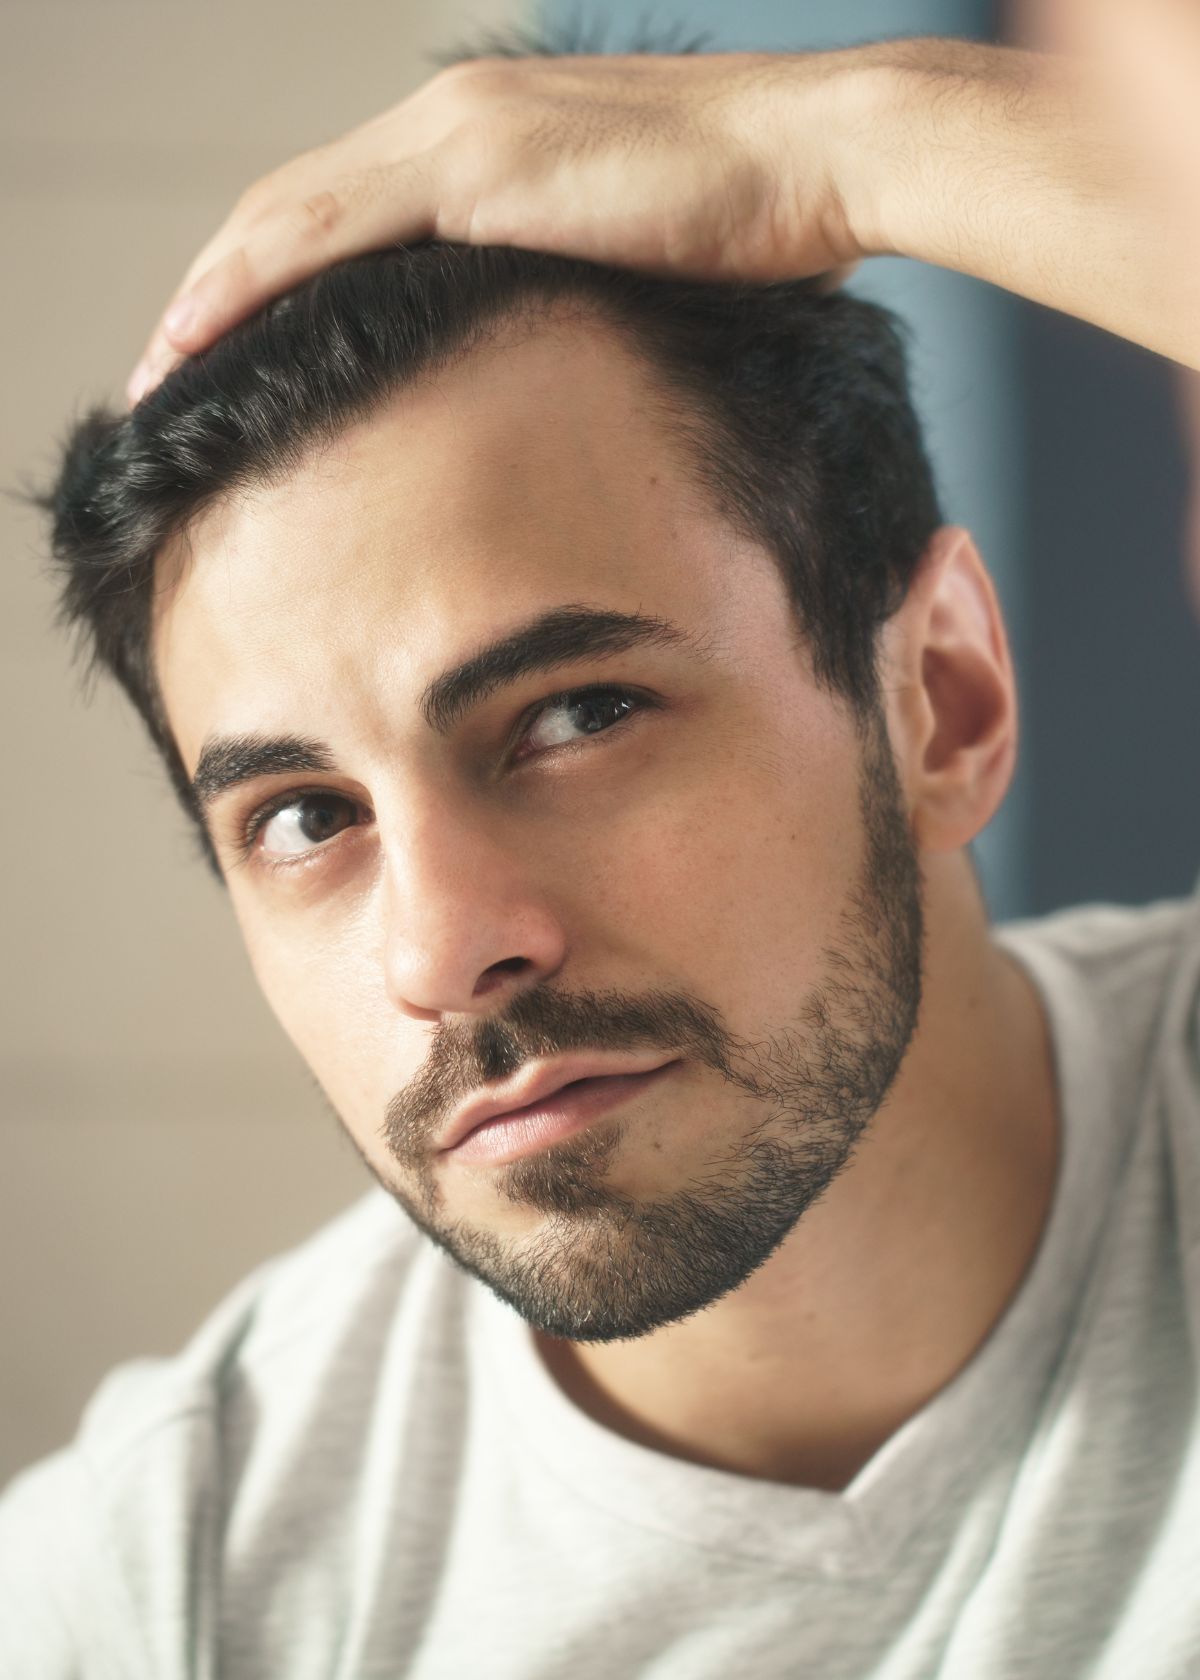 Does Styling Powder Cause Hair Loss